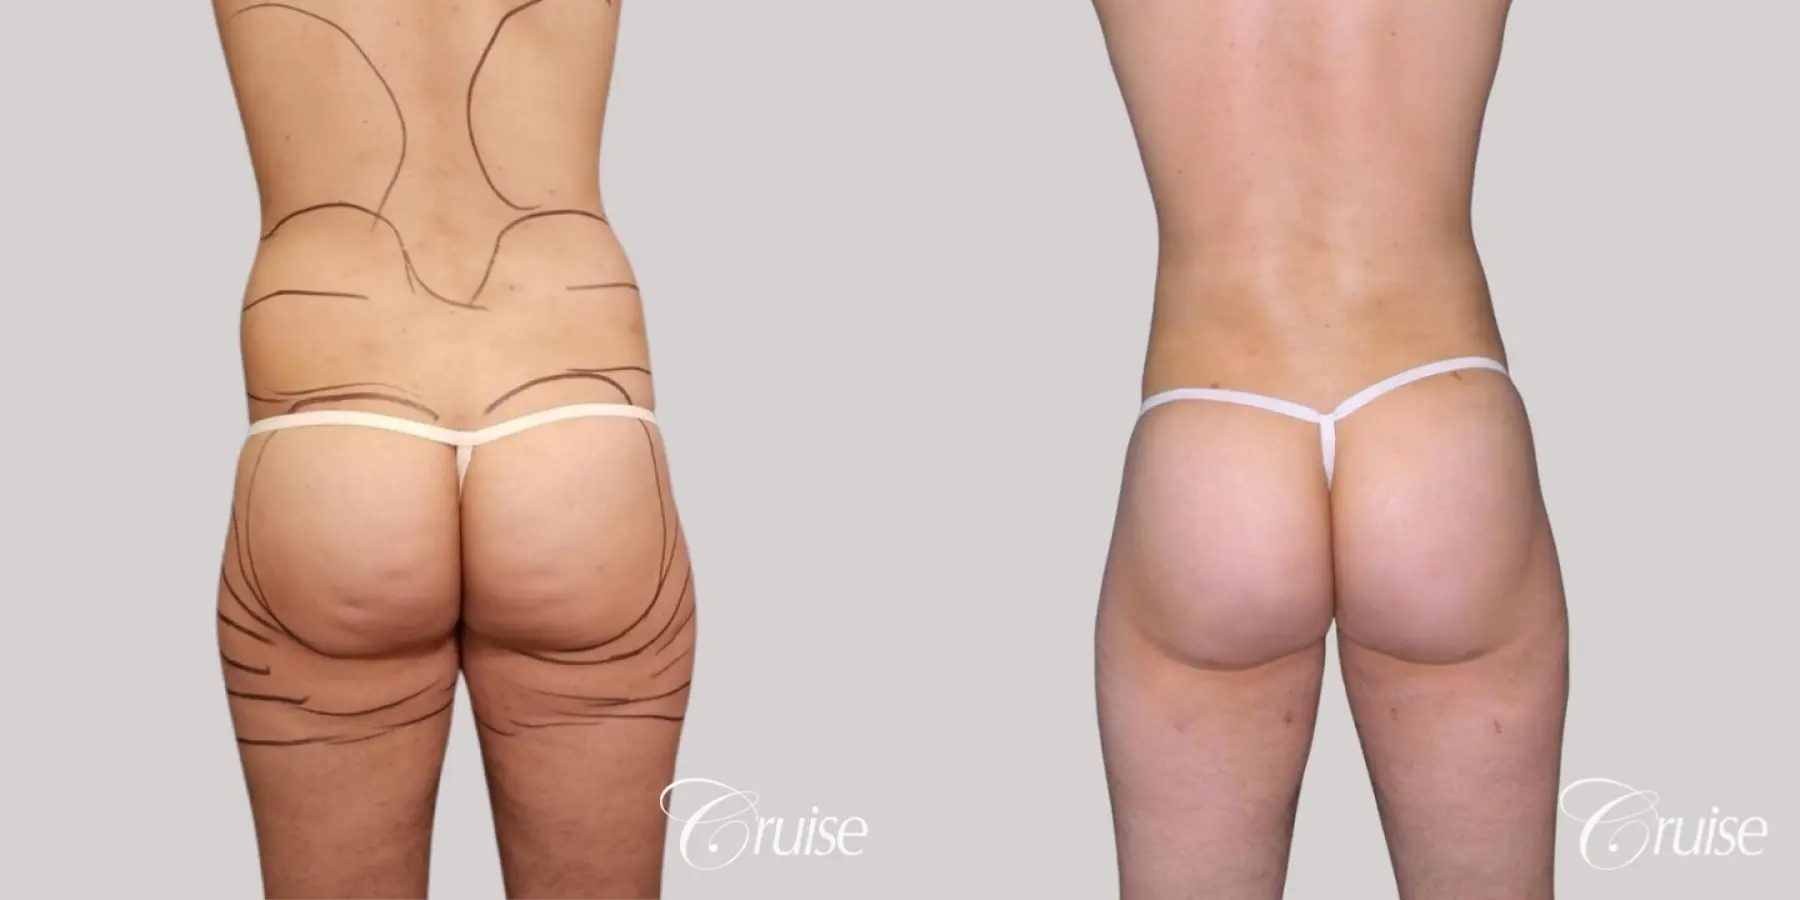 brazilian-butt-lift-before-and-after-50z749C5A75B_highres